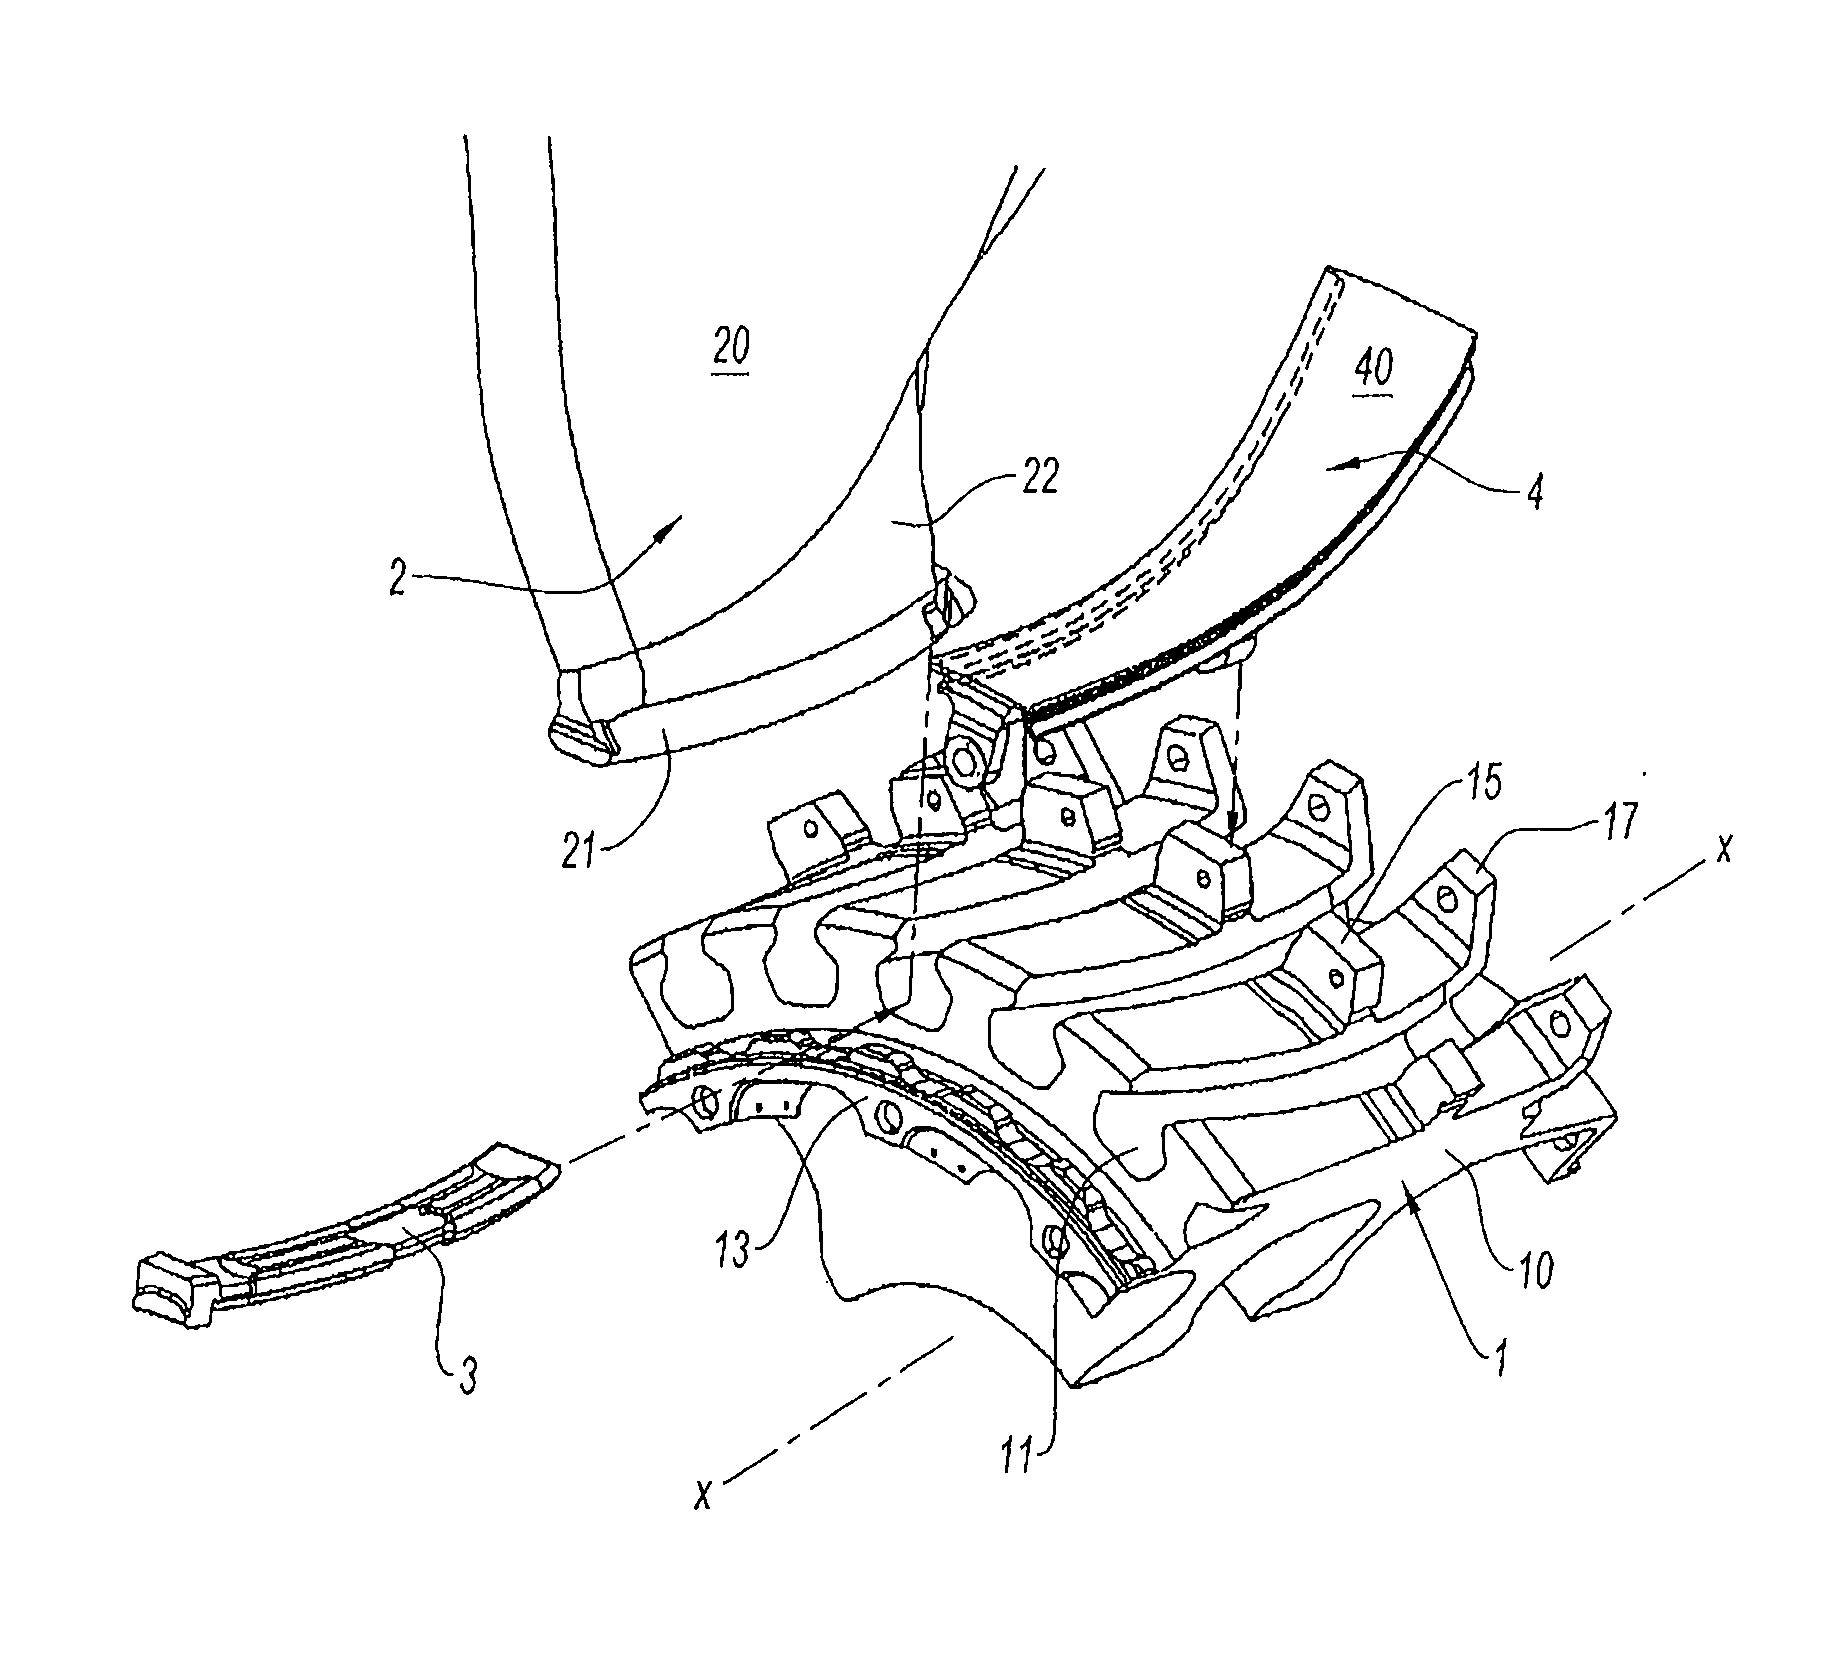 Platform seal in a turbomachine rotor, method for improving the seal between a platform and a turbomachine blade